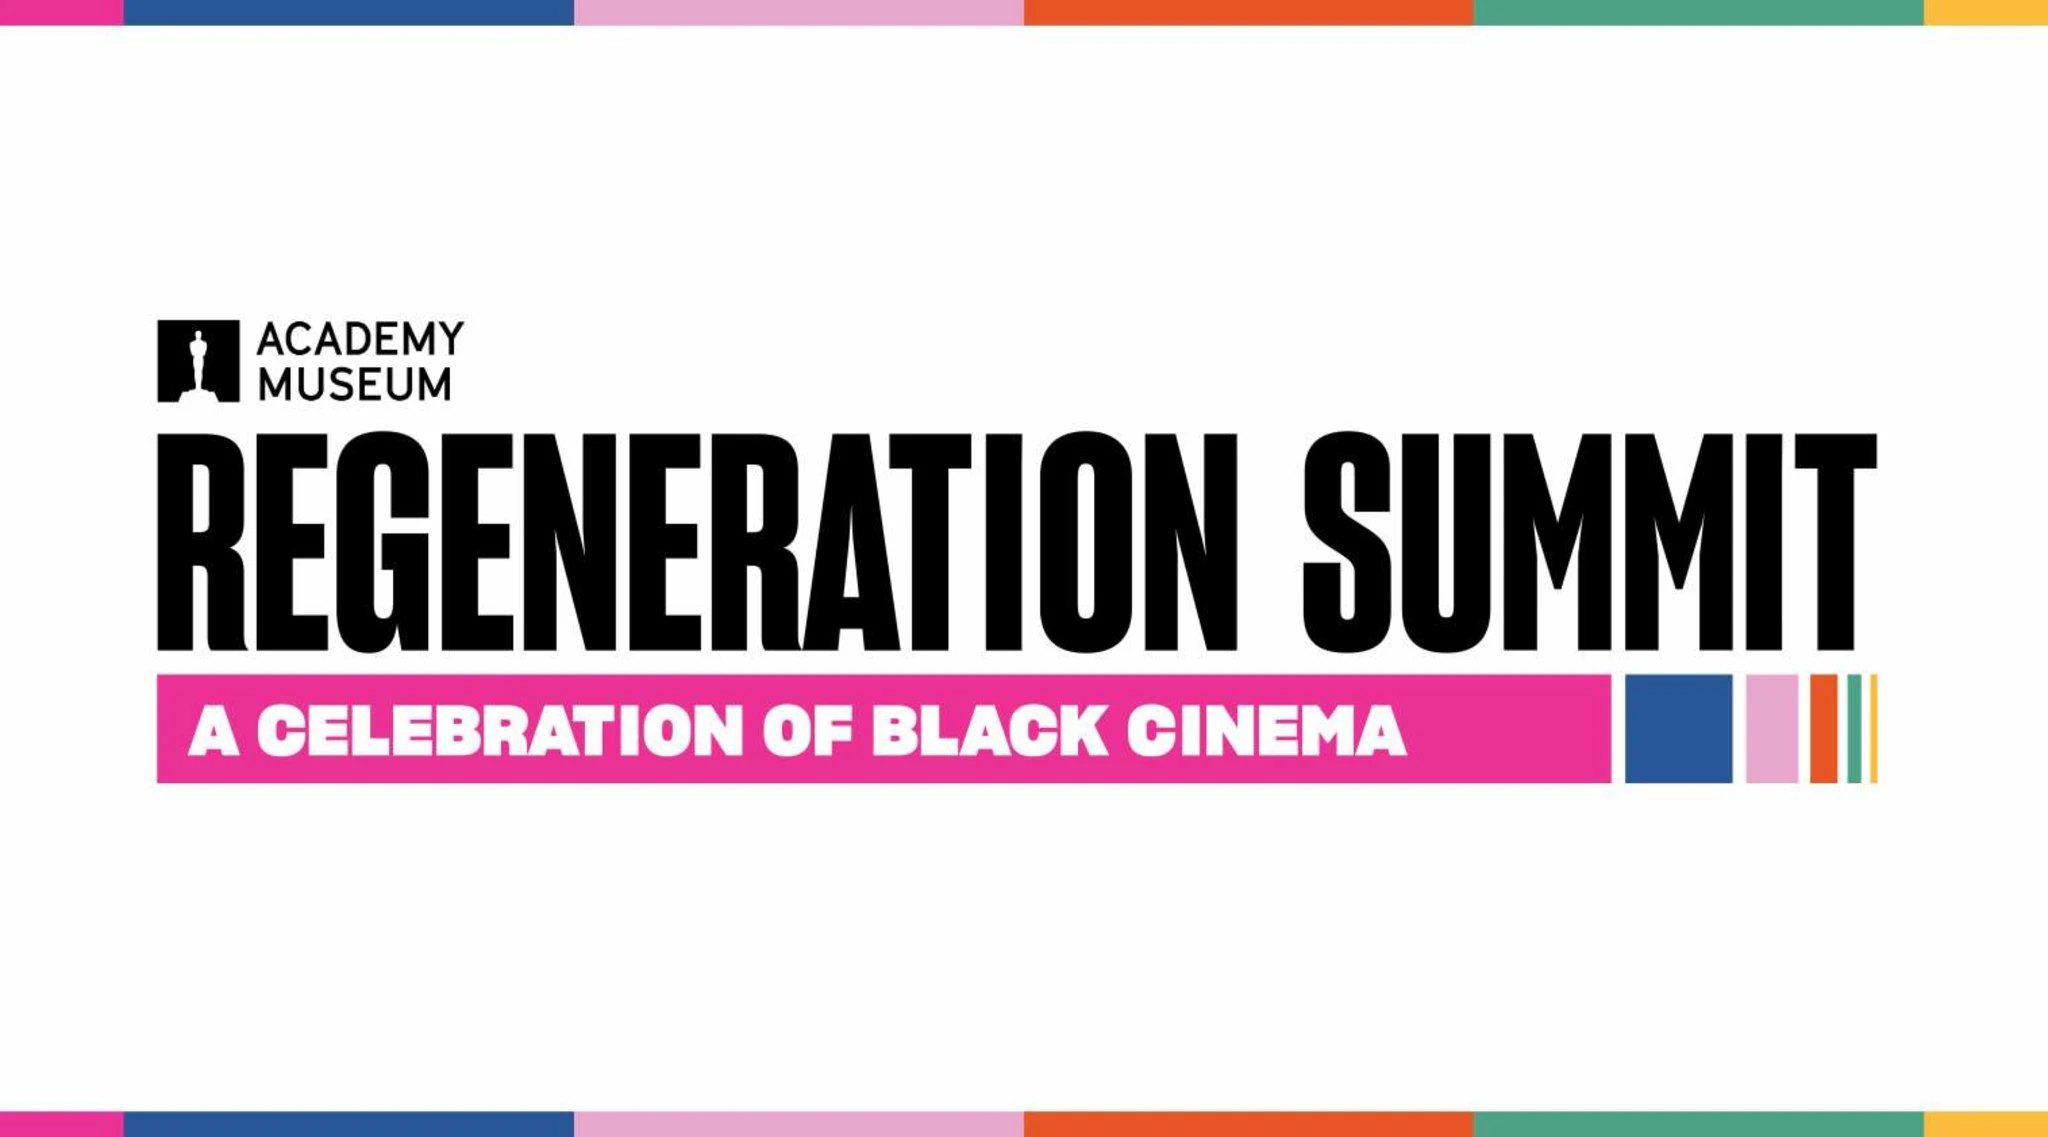 How to Attend the Academy Museum's 'Regeneration Summit: A Celebration of Black Cinema'